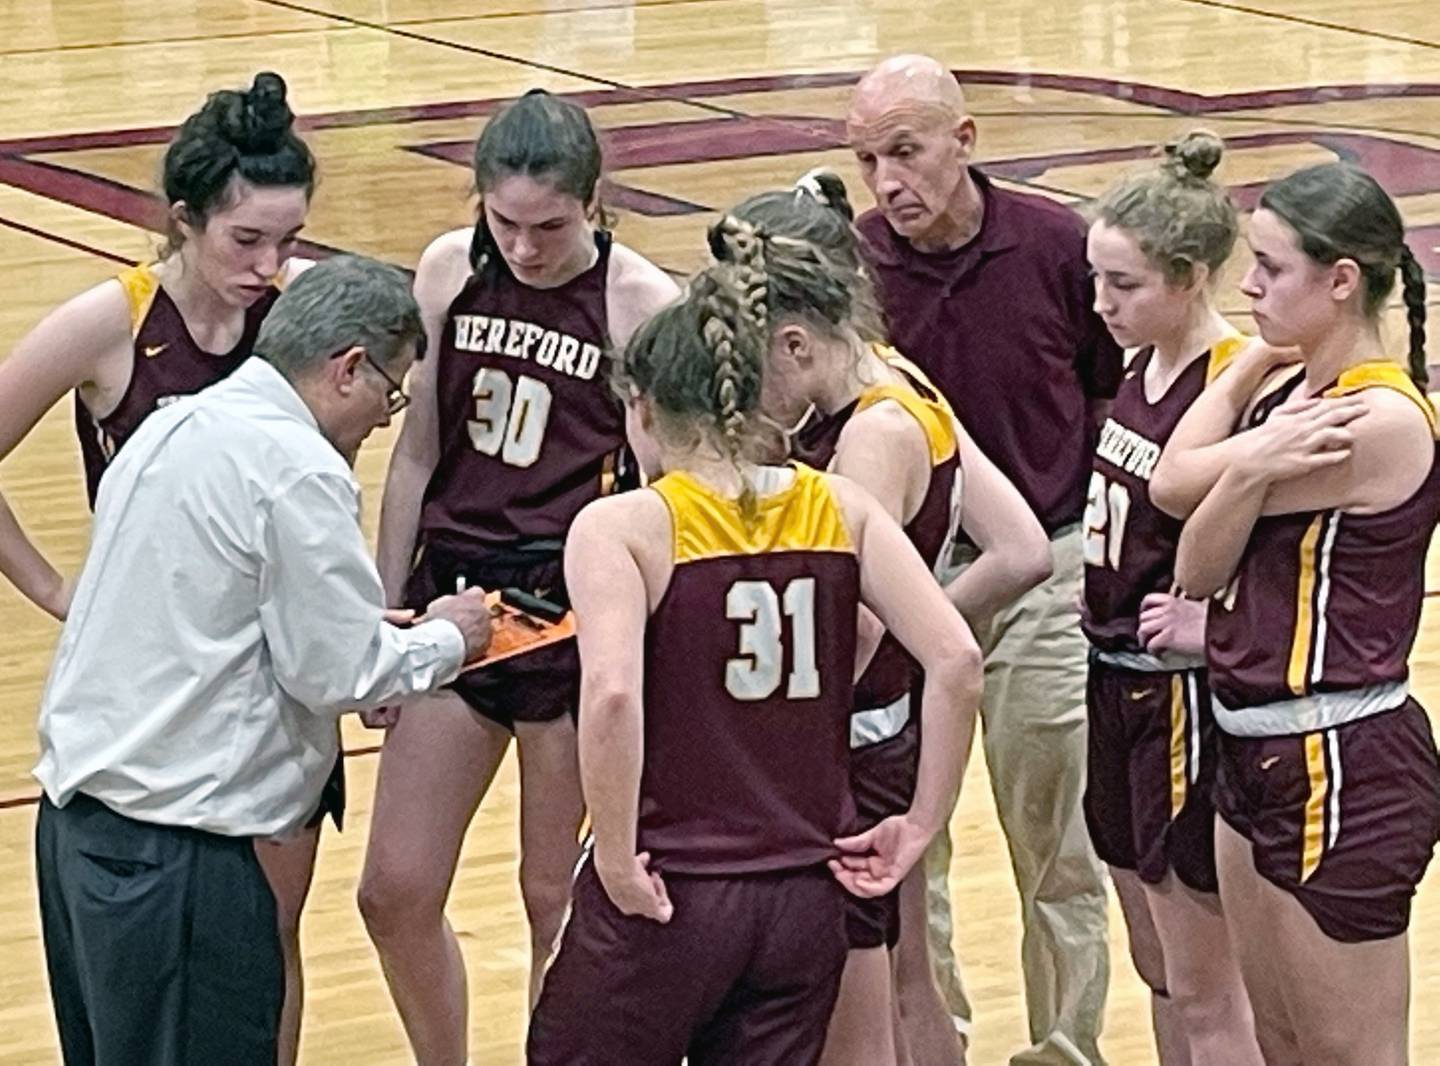 Hereford coach Dave Schreiner draws up a play for the Bulls late in their 41-38 state semifinal loss to Kent Island. The Bulls, who were state finalists last season and reached the final four three of the past four years, finished the season 19-5.